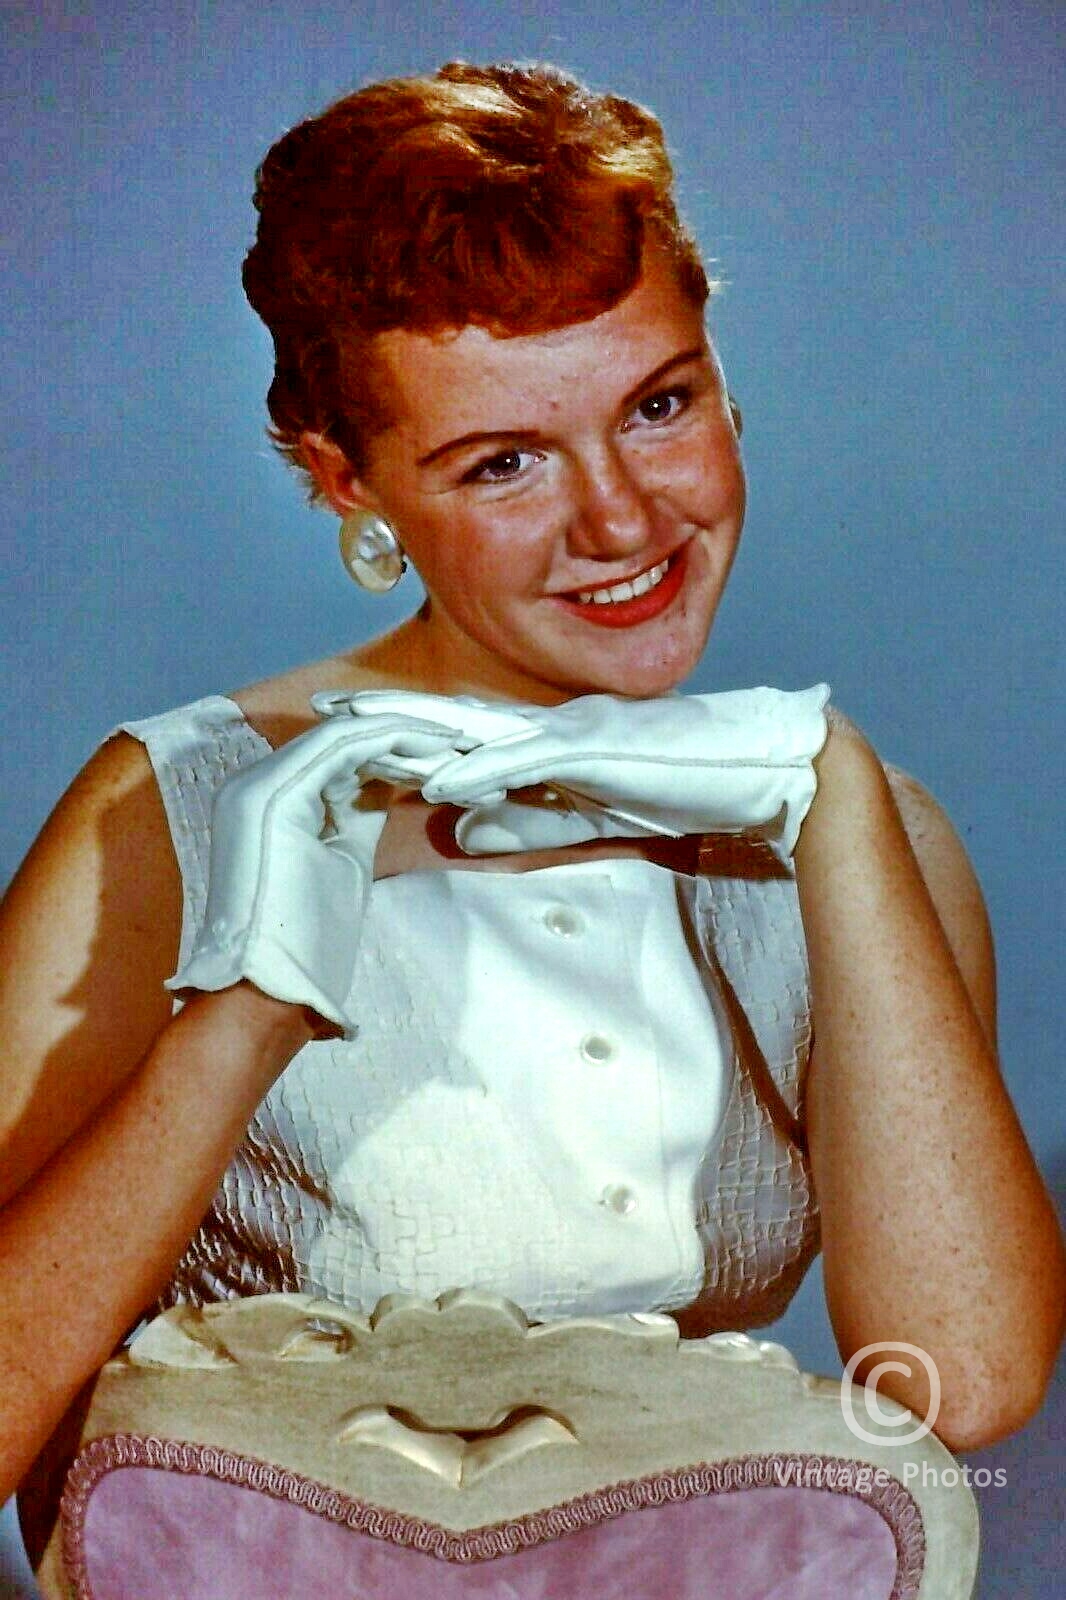 1958 American Fashion, Woman with White Gloves